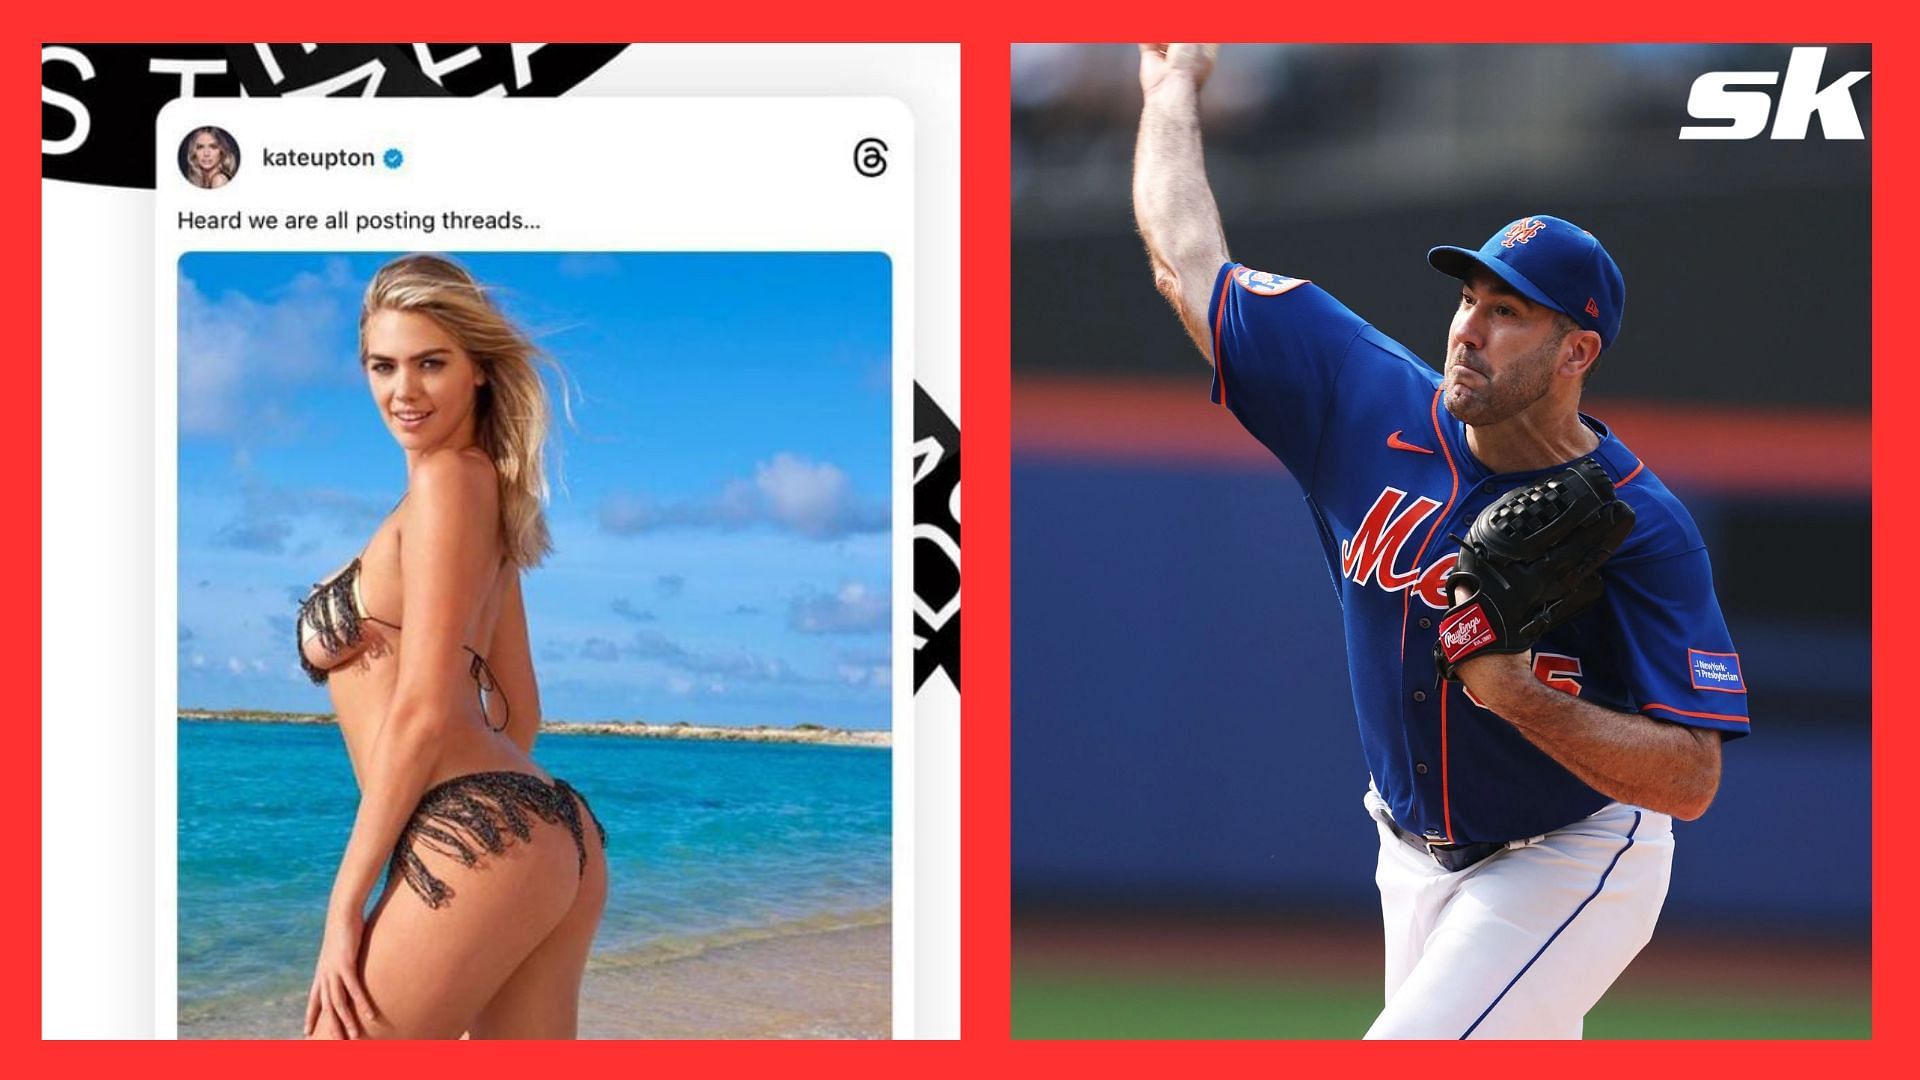 In Photos: Kate Upton makes a jaw-dropping debut on Threads after going AWOL from Instagram